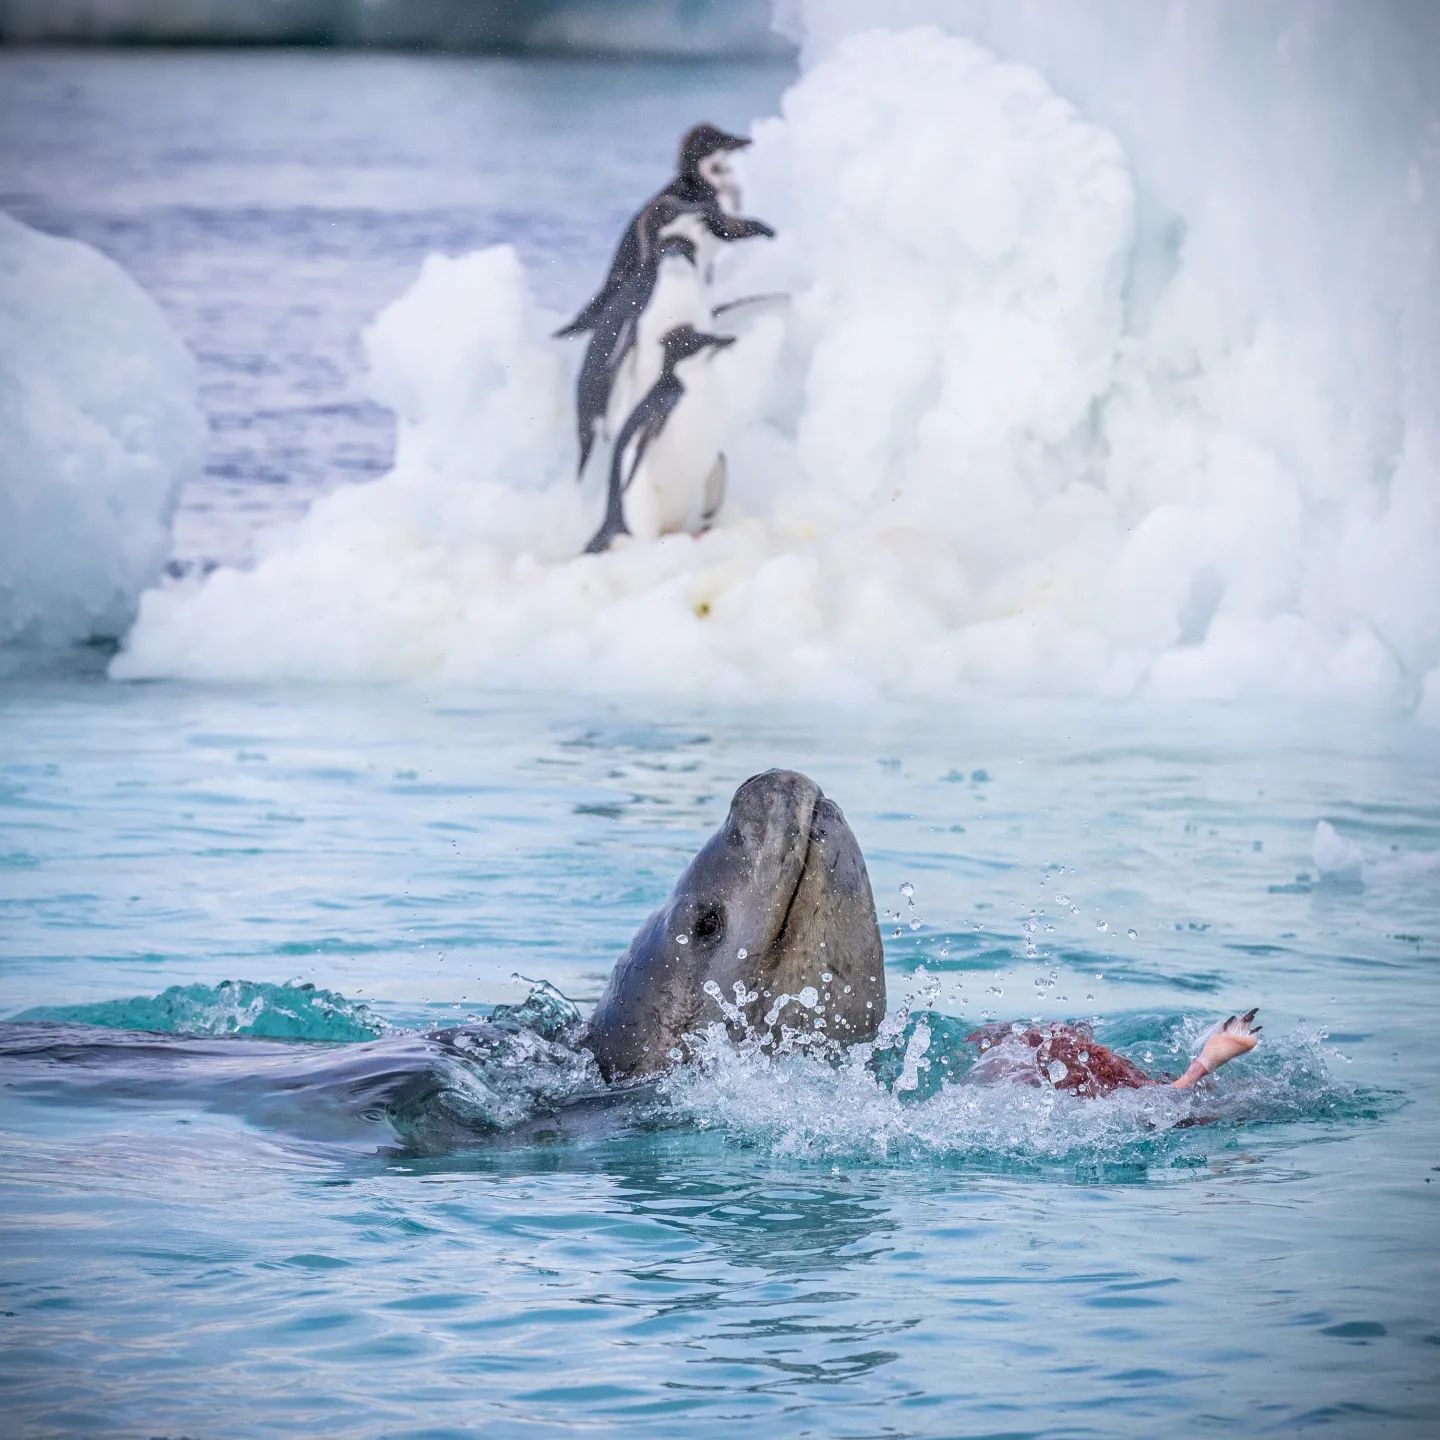 A leopard seal hunting a young Adélie Penguin. Pictures taken near Brown Bluff, Antarctica